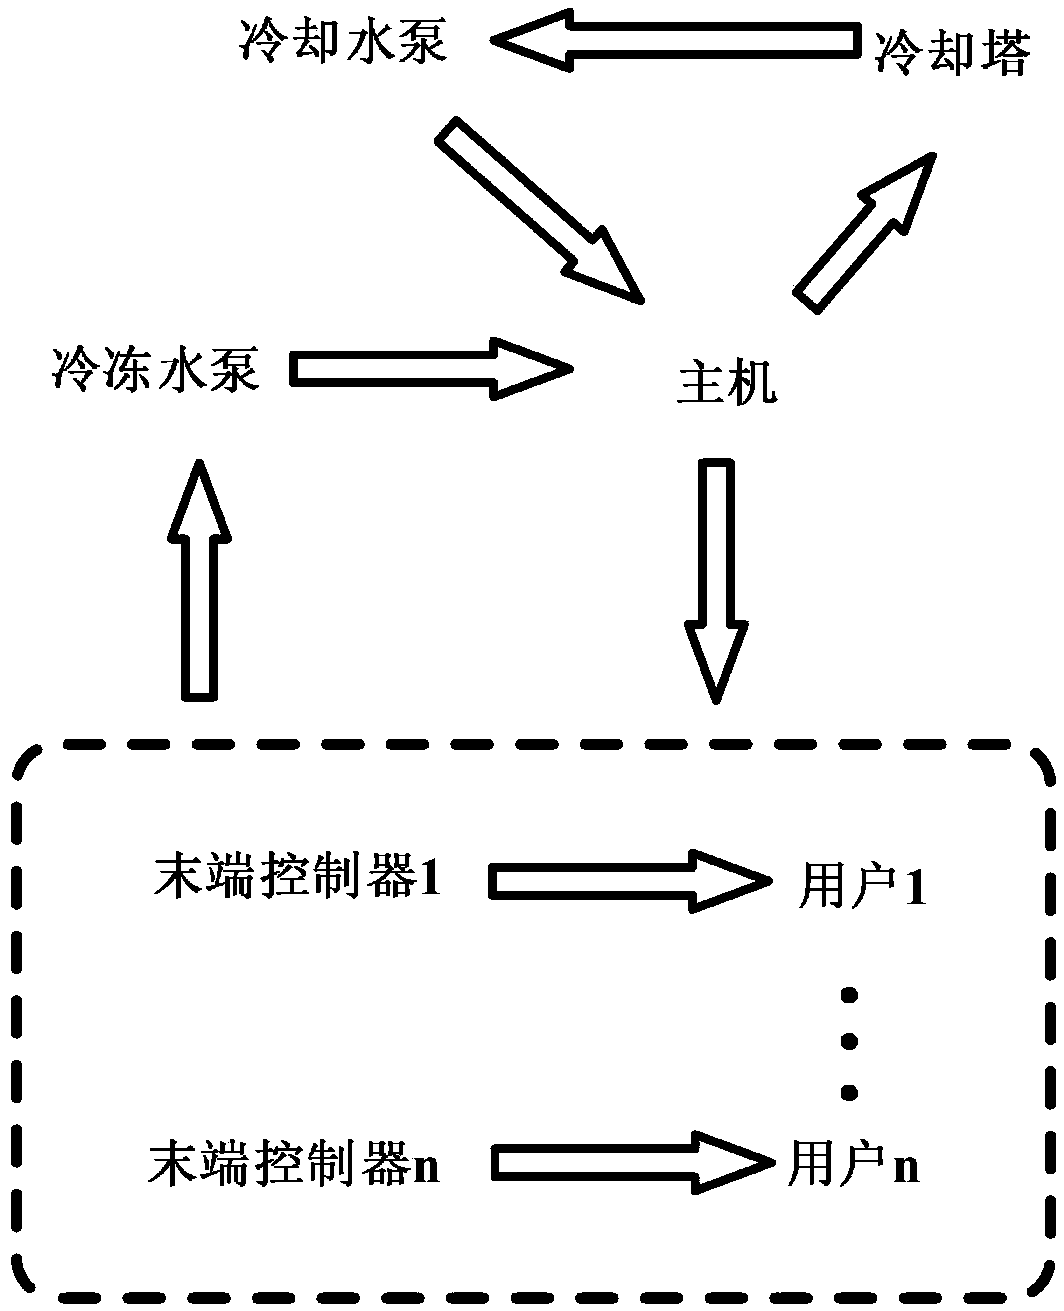 Control method of central air conditioning load response to HVDC locking accident